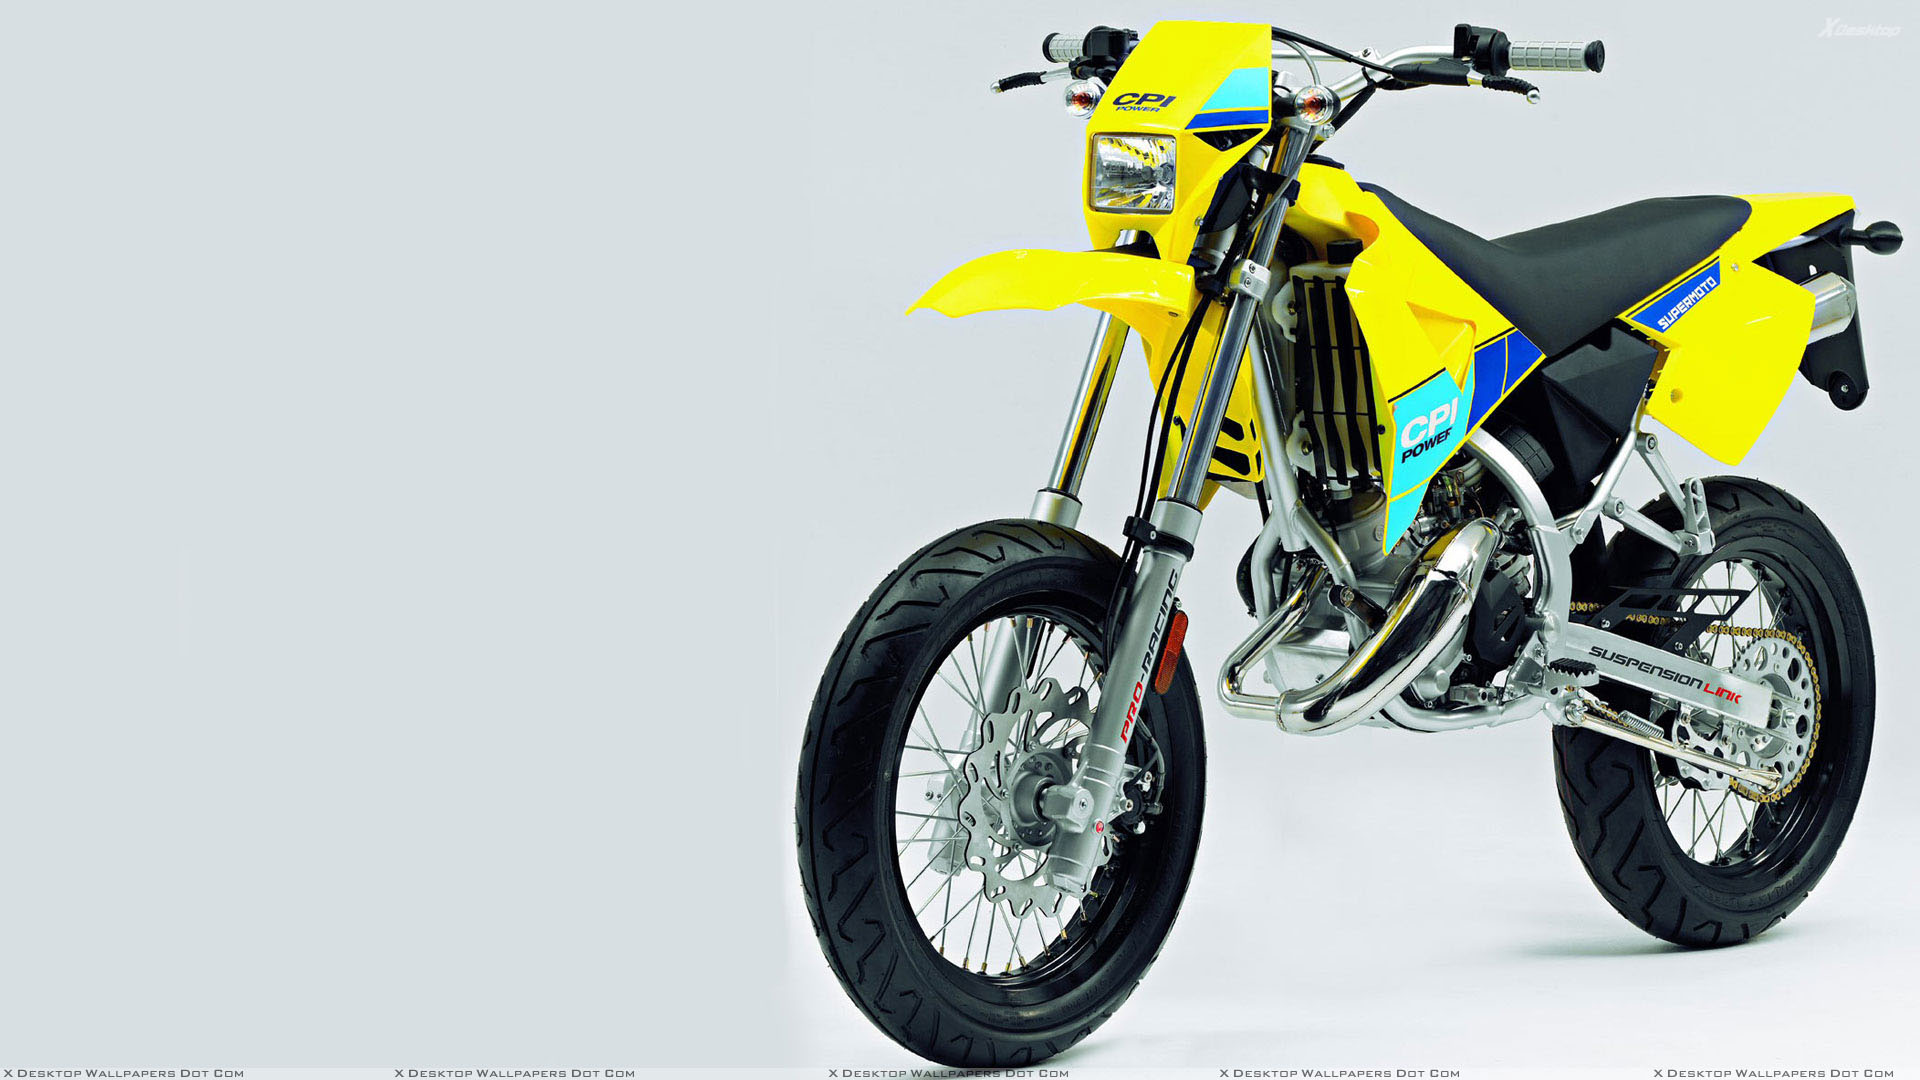 CPI Supermoto 50 in Yellow Front Side Pose Wallpaper